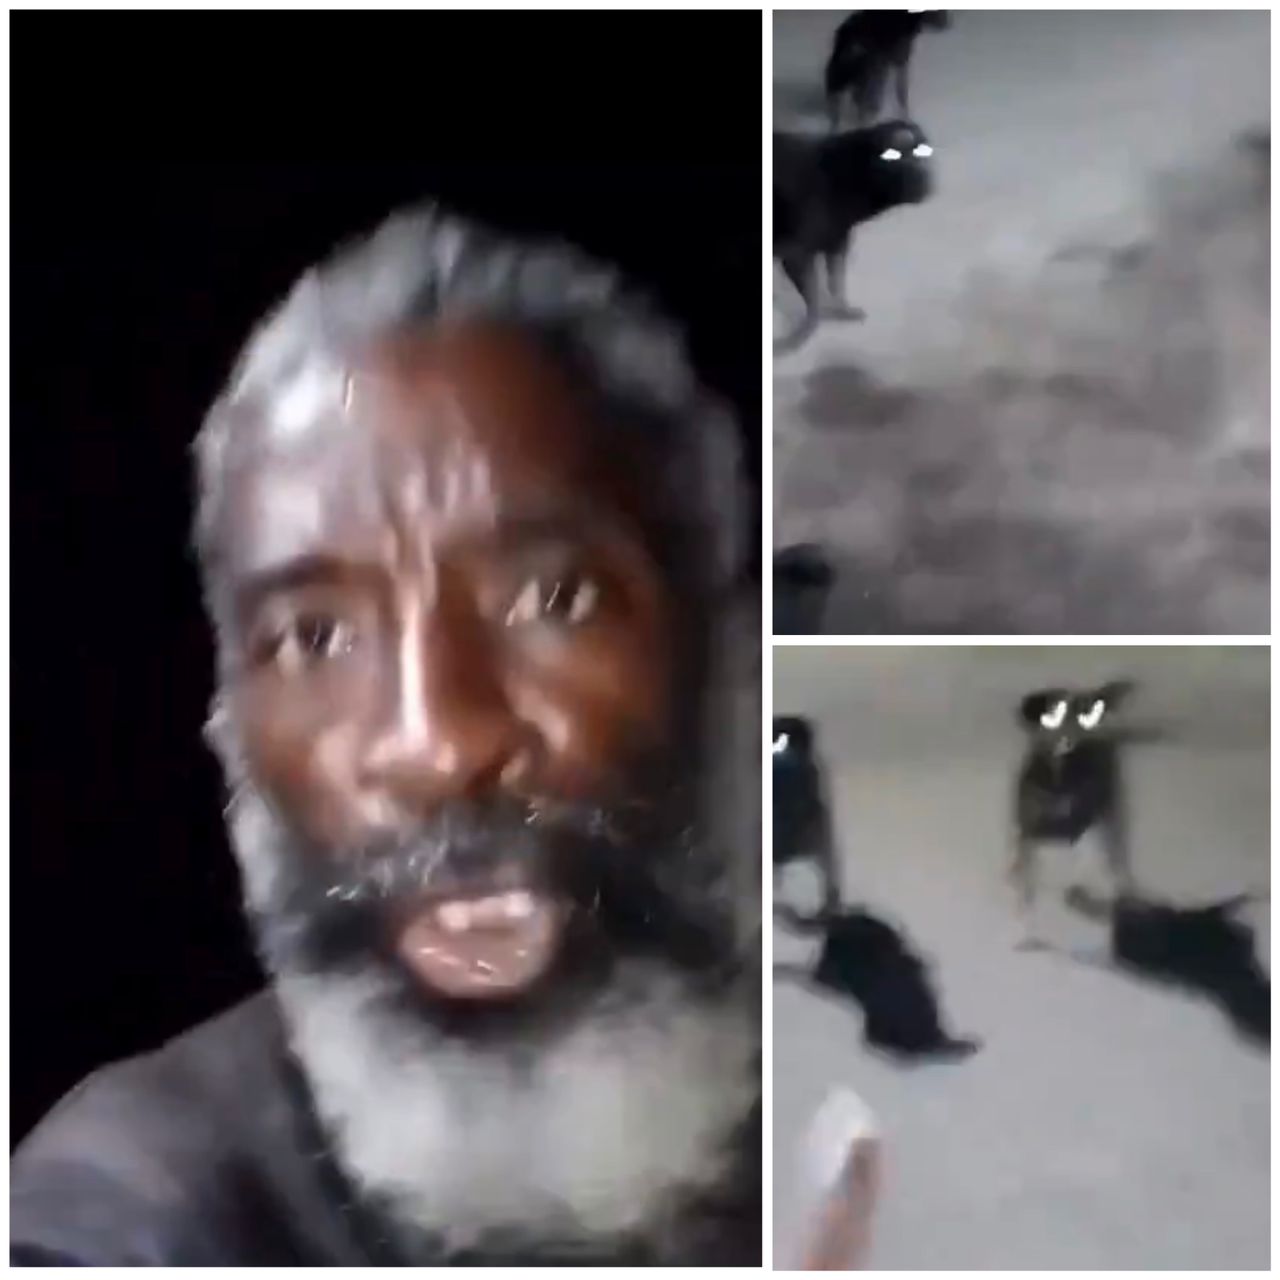 I serve a living God - Man prays fervently in tongues to chase away multiple wild dogs (video)